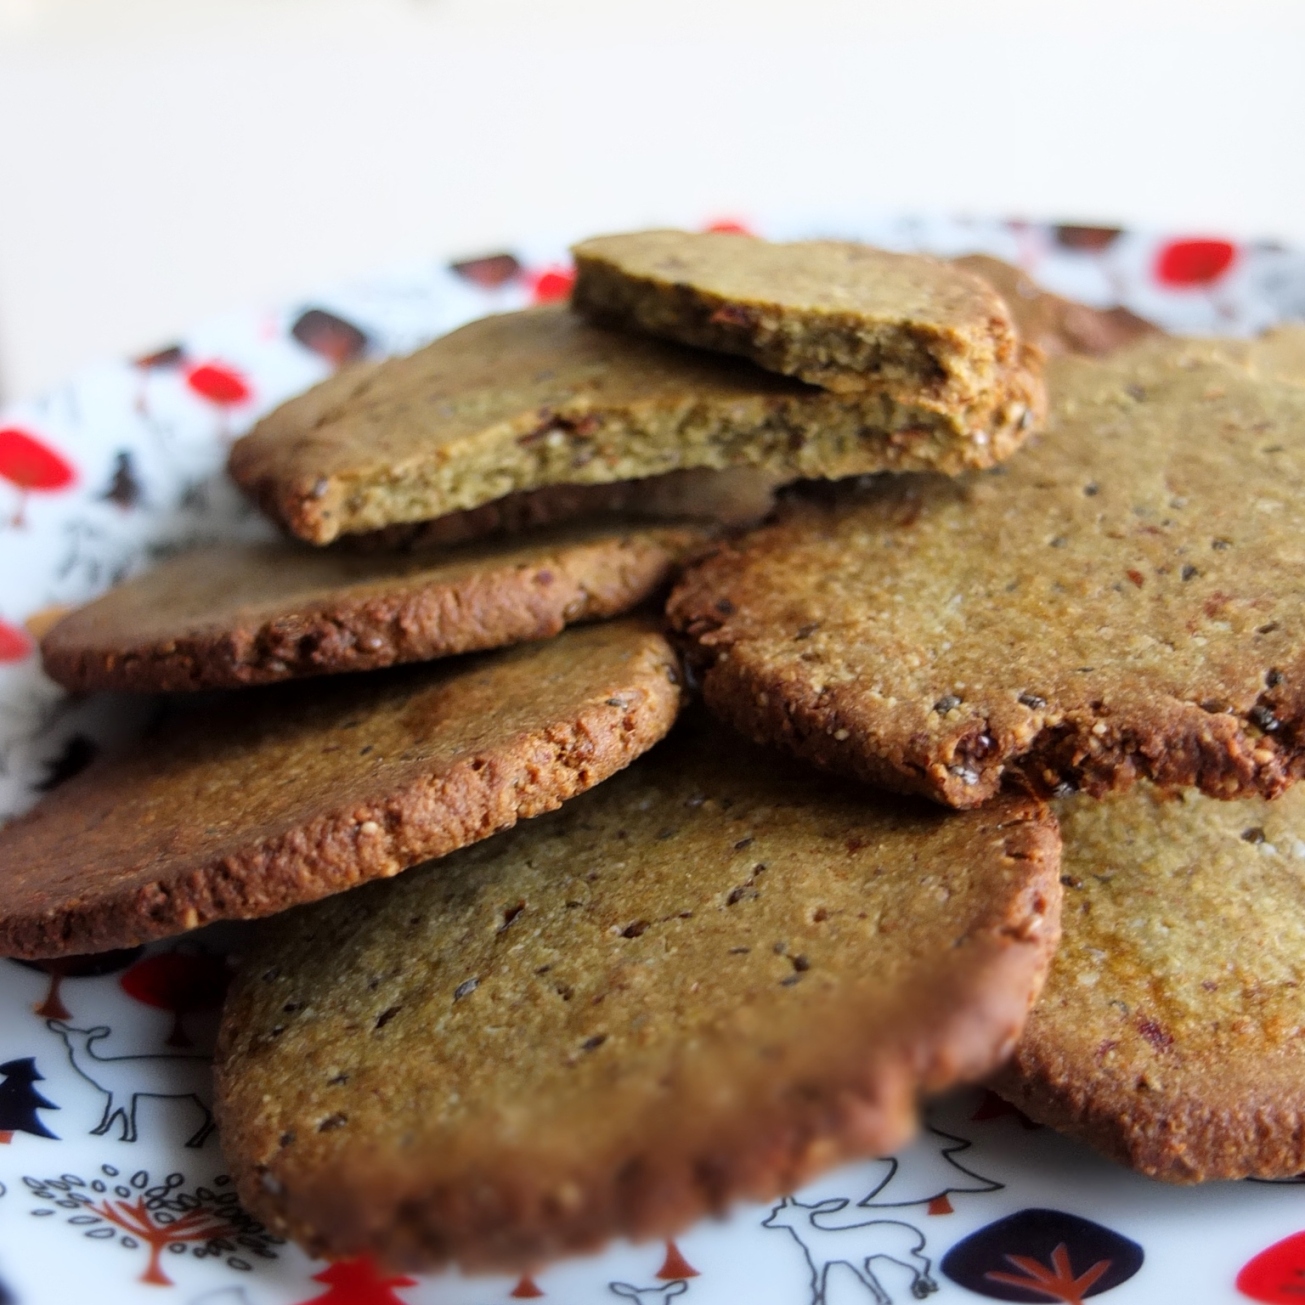 Buckwheat and nut superfood cookies (biscuits)